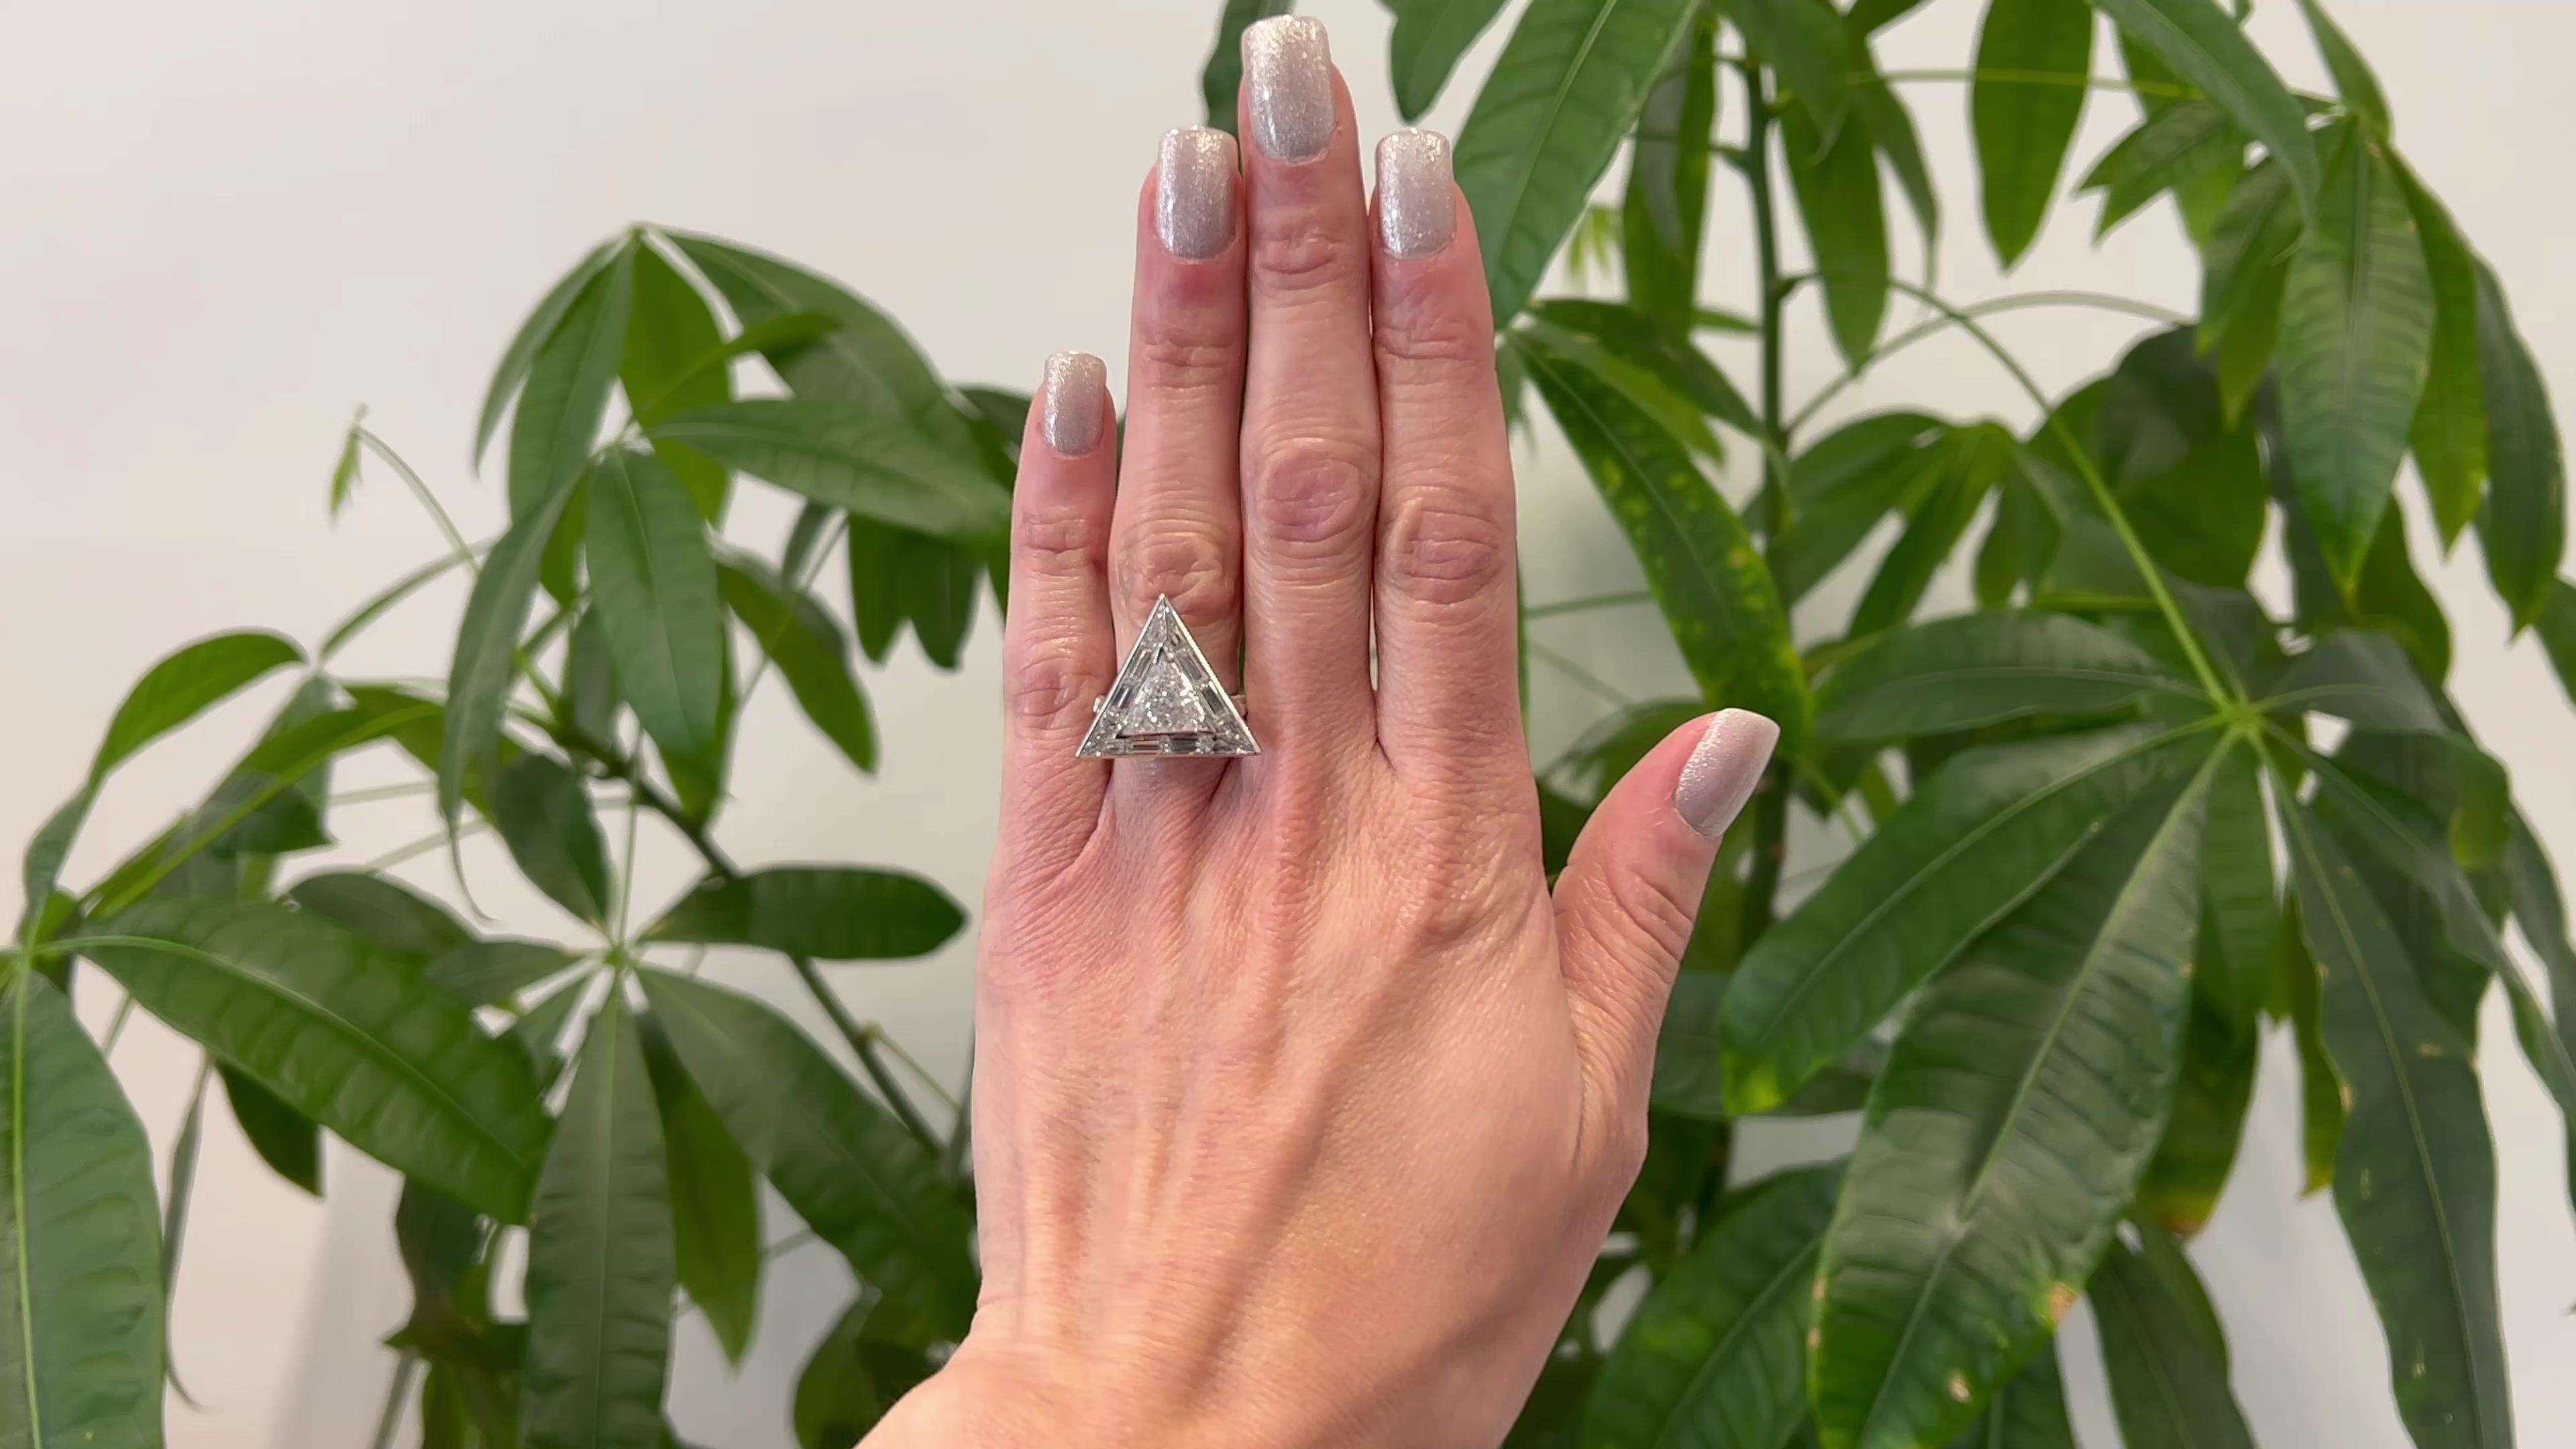 One Mid Century GIA 2.45 Carats Diamond Platinum Triangle Cocktail Ring. Featuring one GIA triangular step cut of 2.45 carats, accompanied with GIA #1226735641 stating the diamond is F color, SI2 clarity. Accented by 14 baguette cut diamonds with a